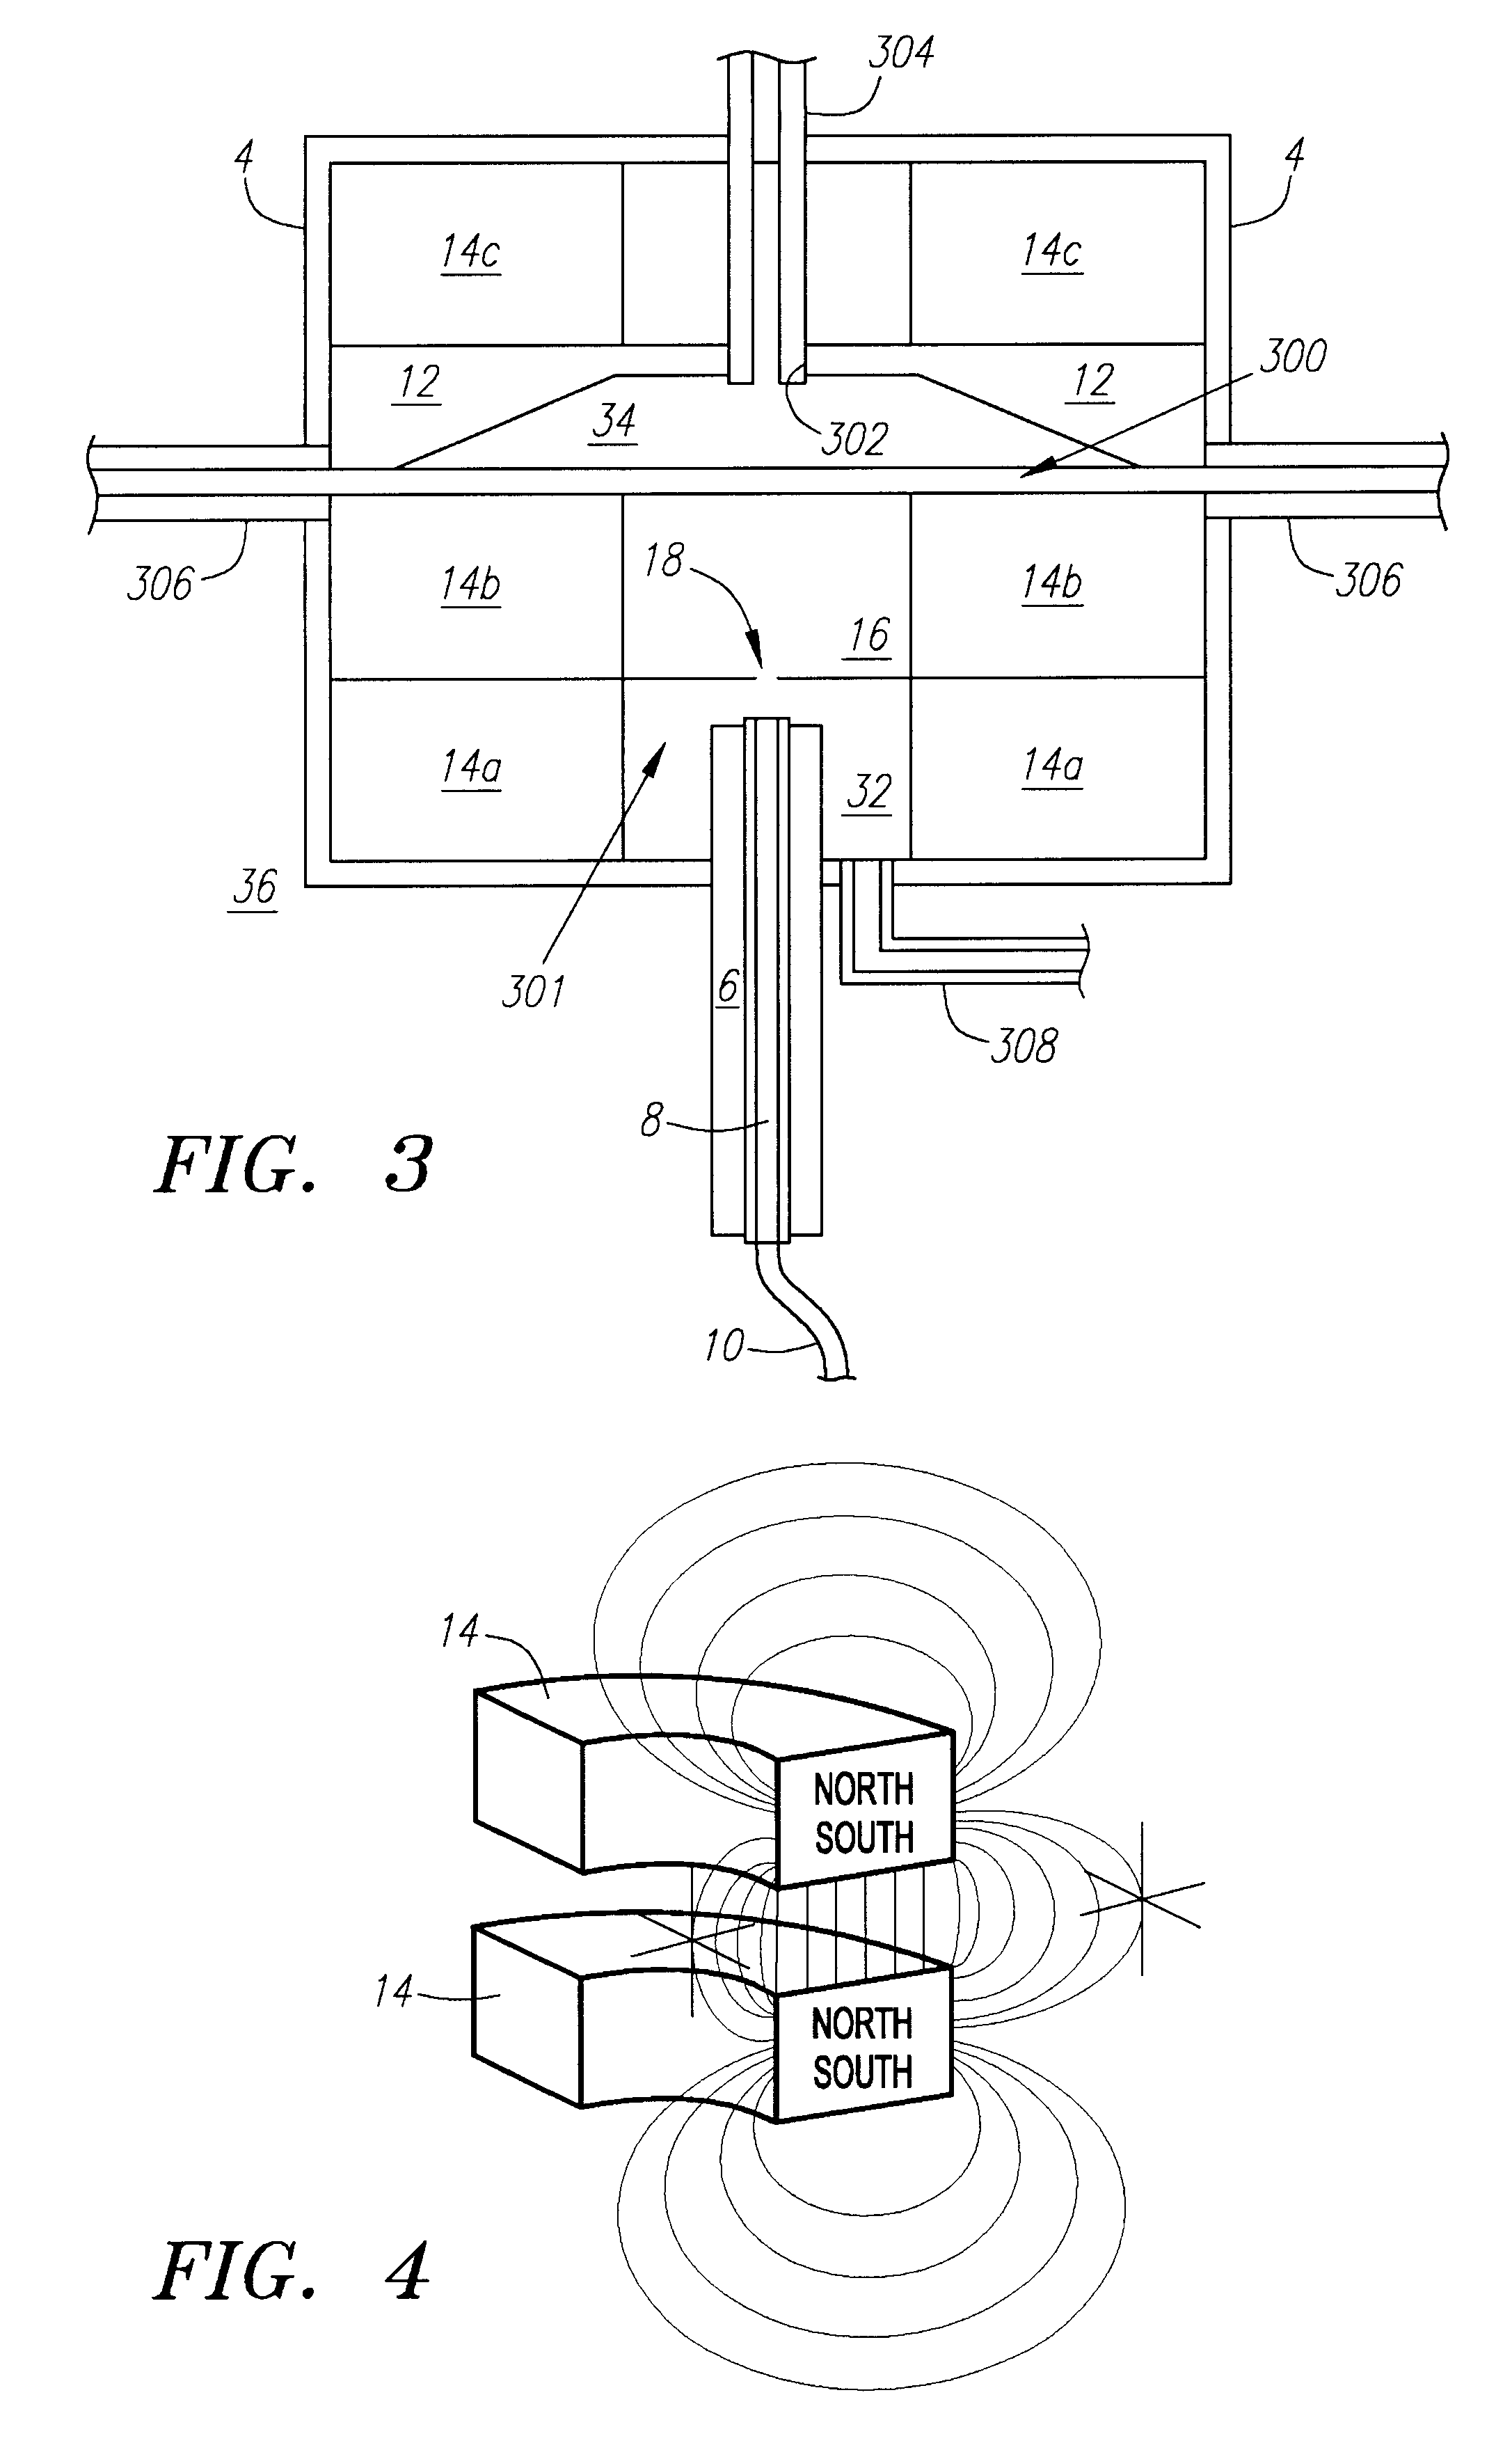 Apparatus and method for magneto-electrodynamic separation of ions within an electrolytic fluid